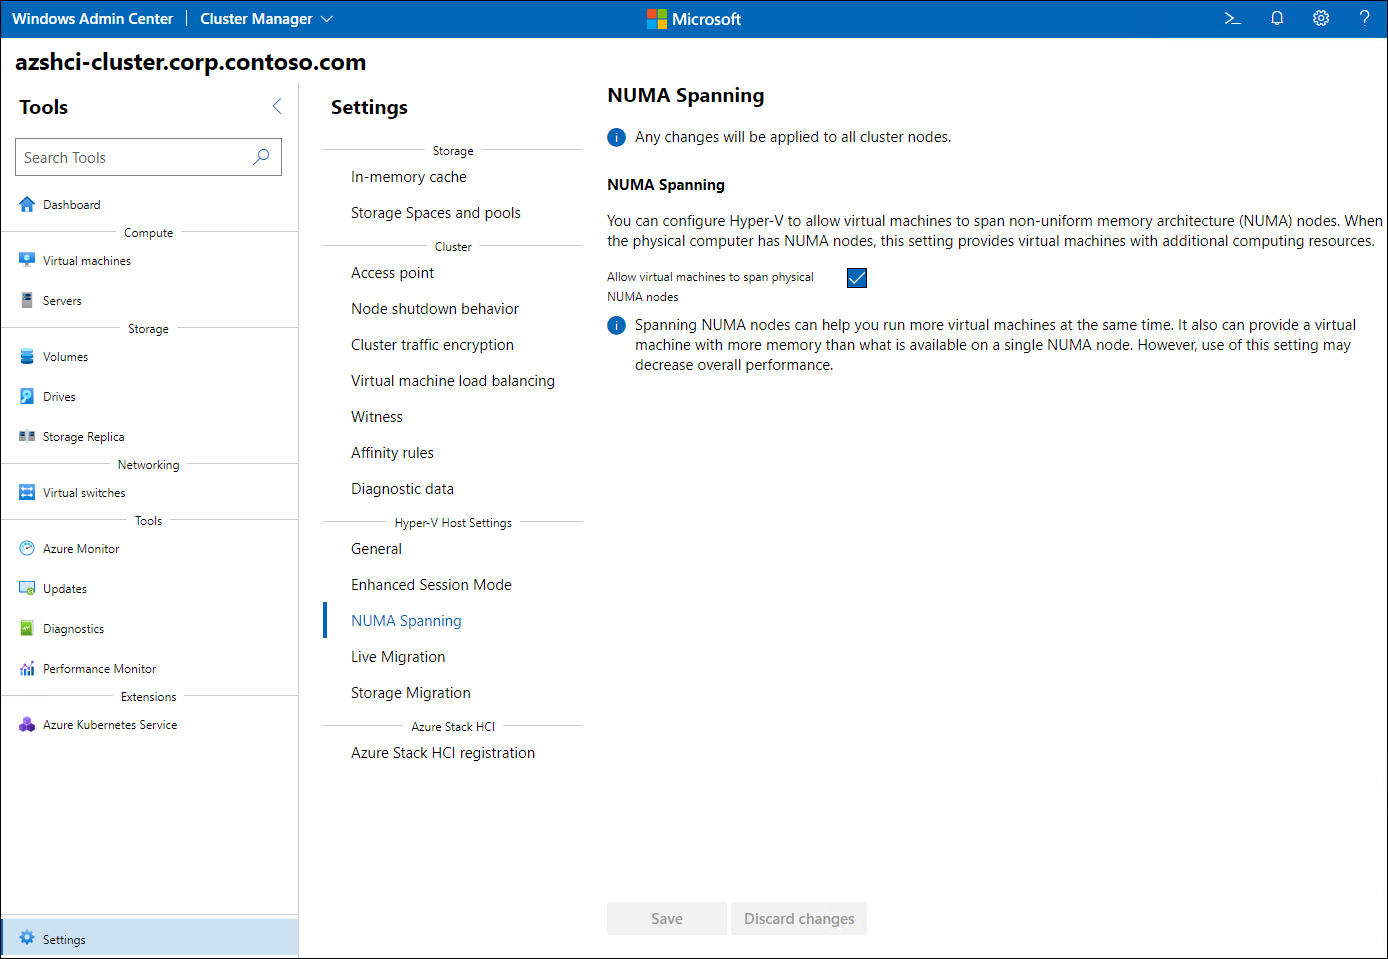 The screenshot depicts the NUMA spanning settings of an Azure Stack HCI cluster.